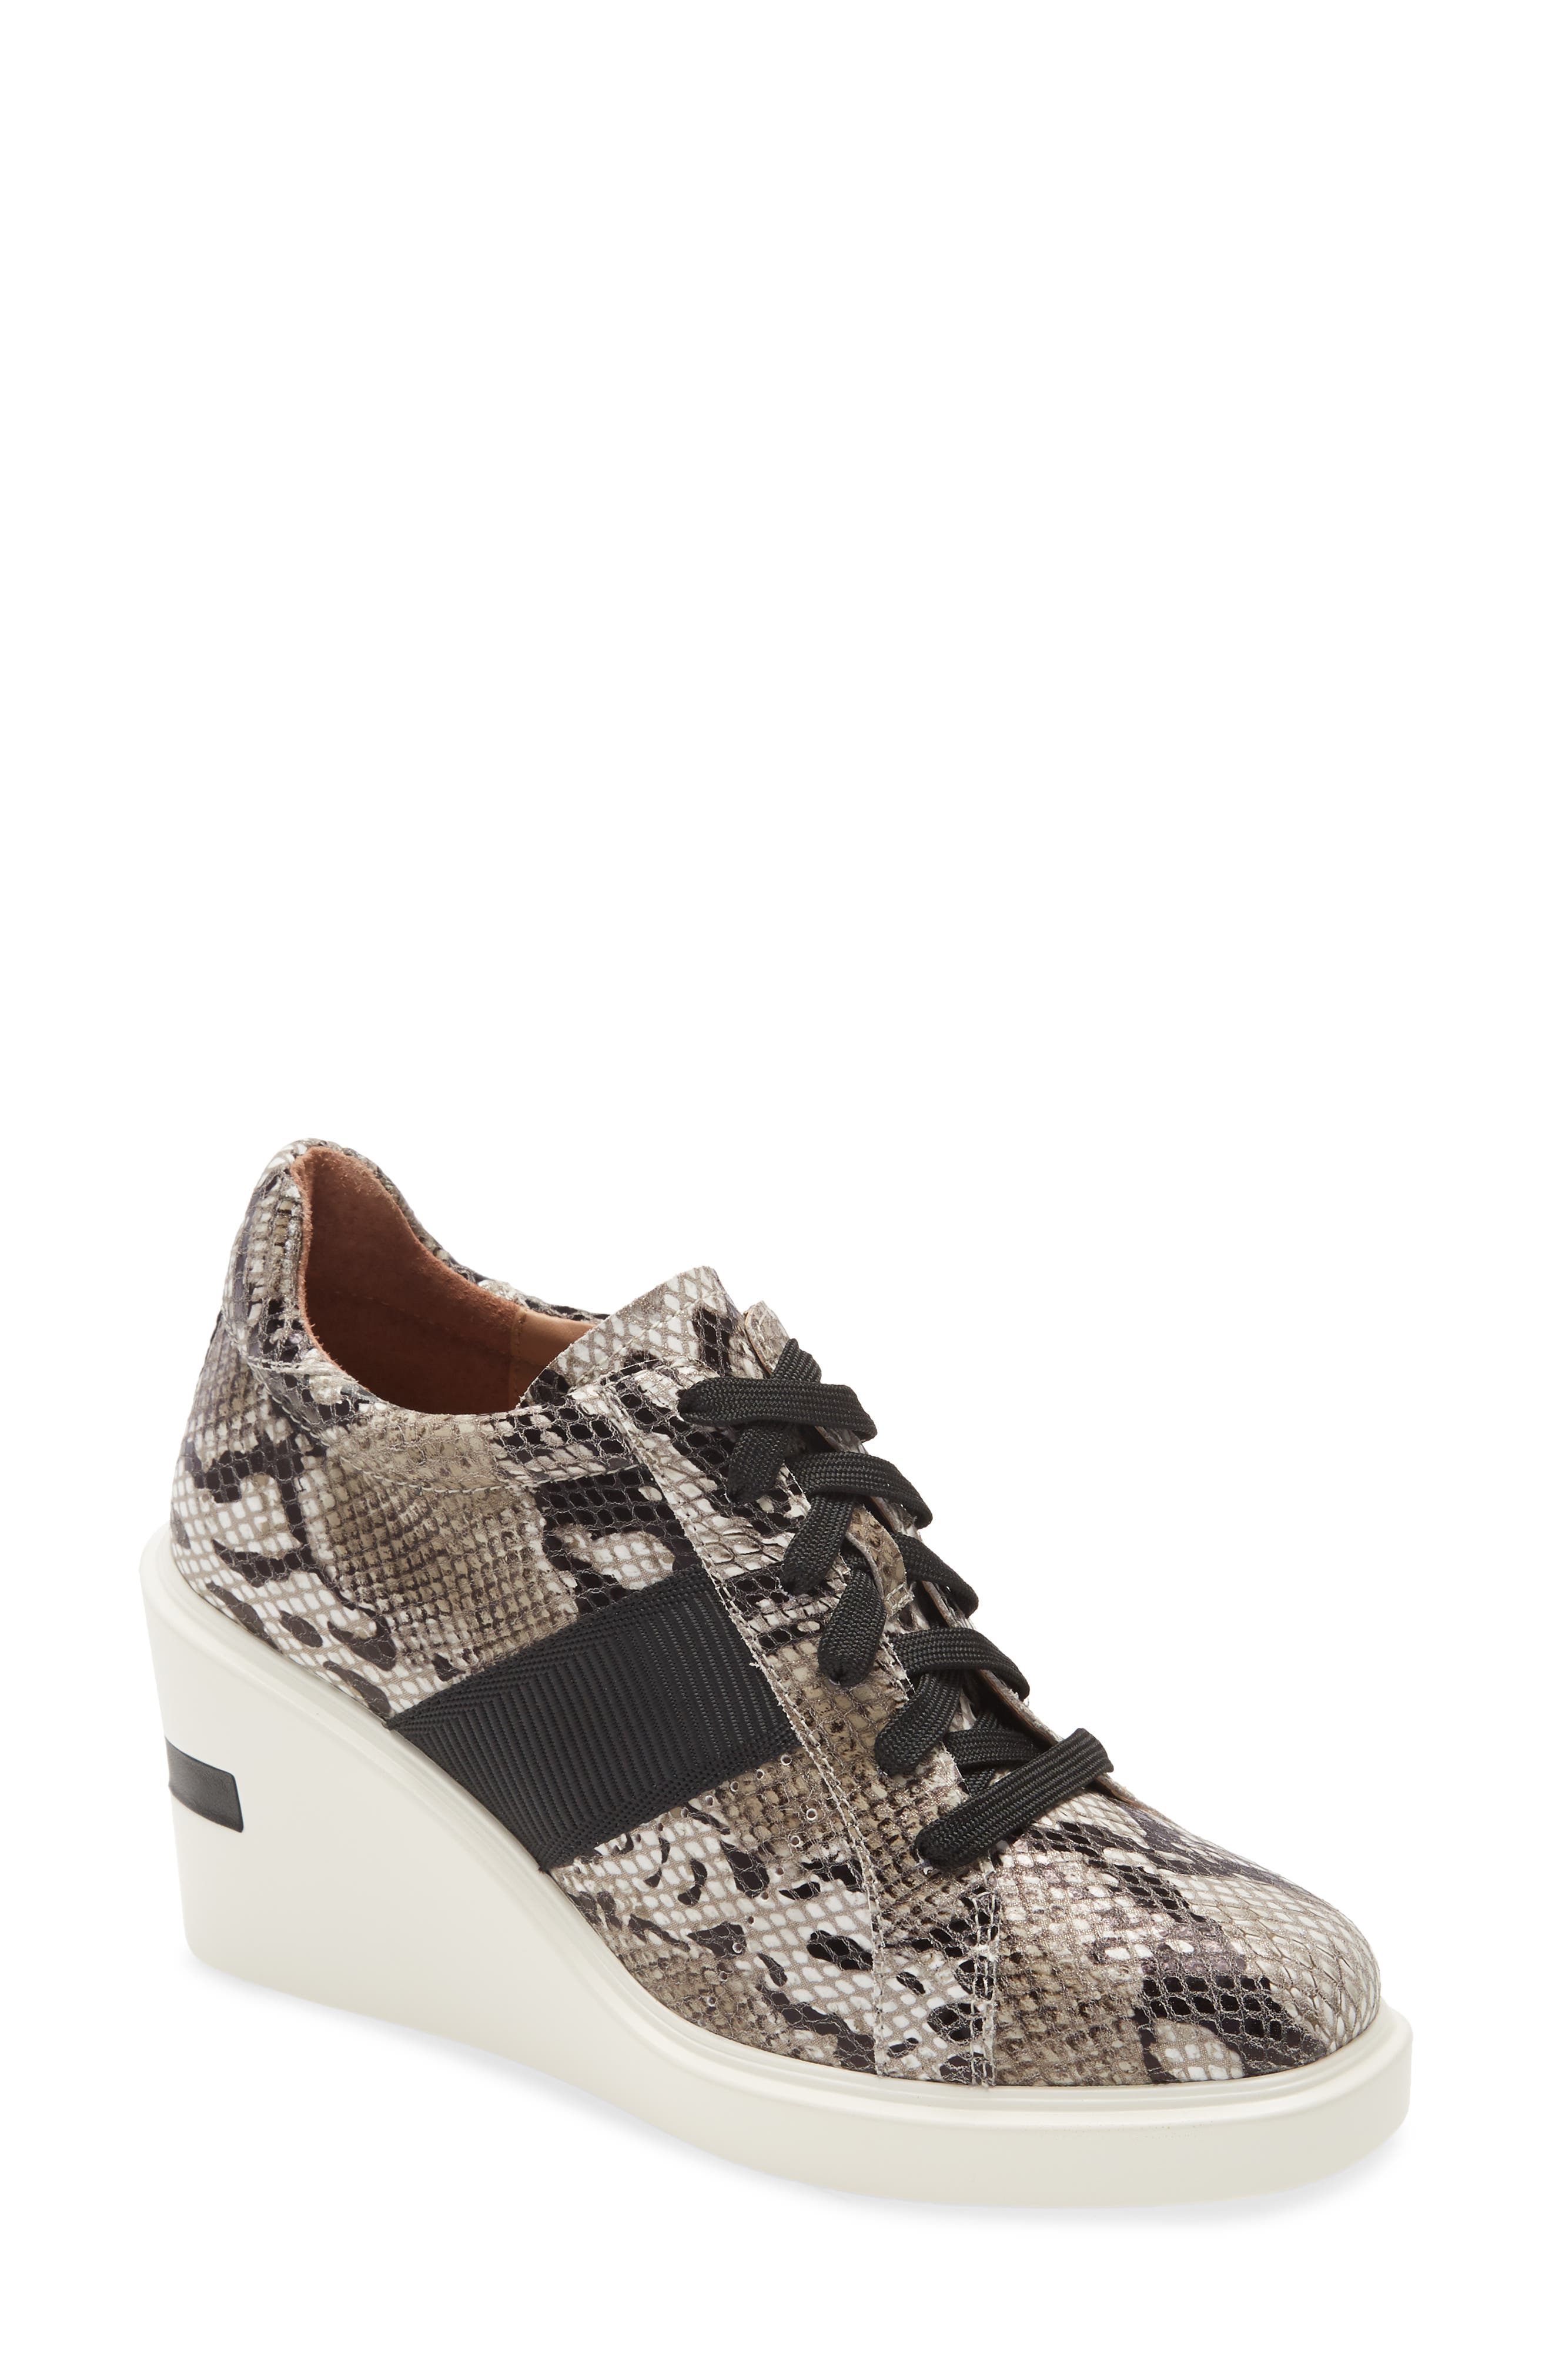 wedge tennis shoes nordstrom